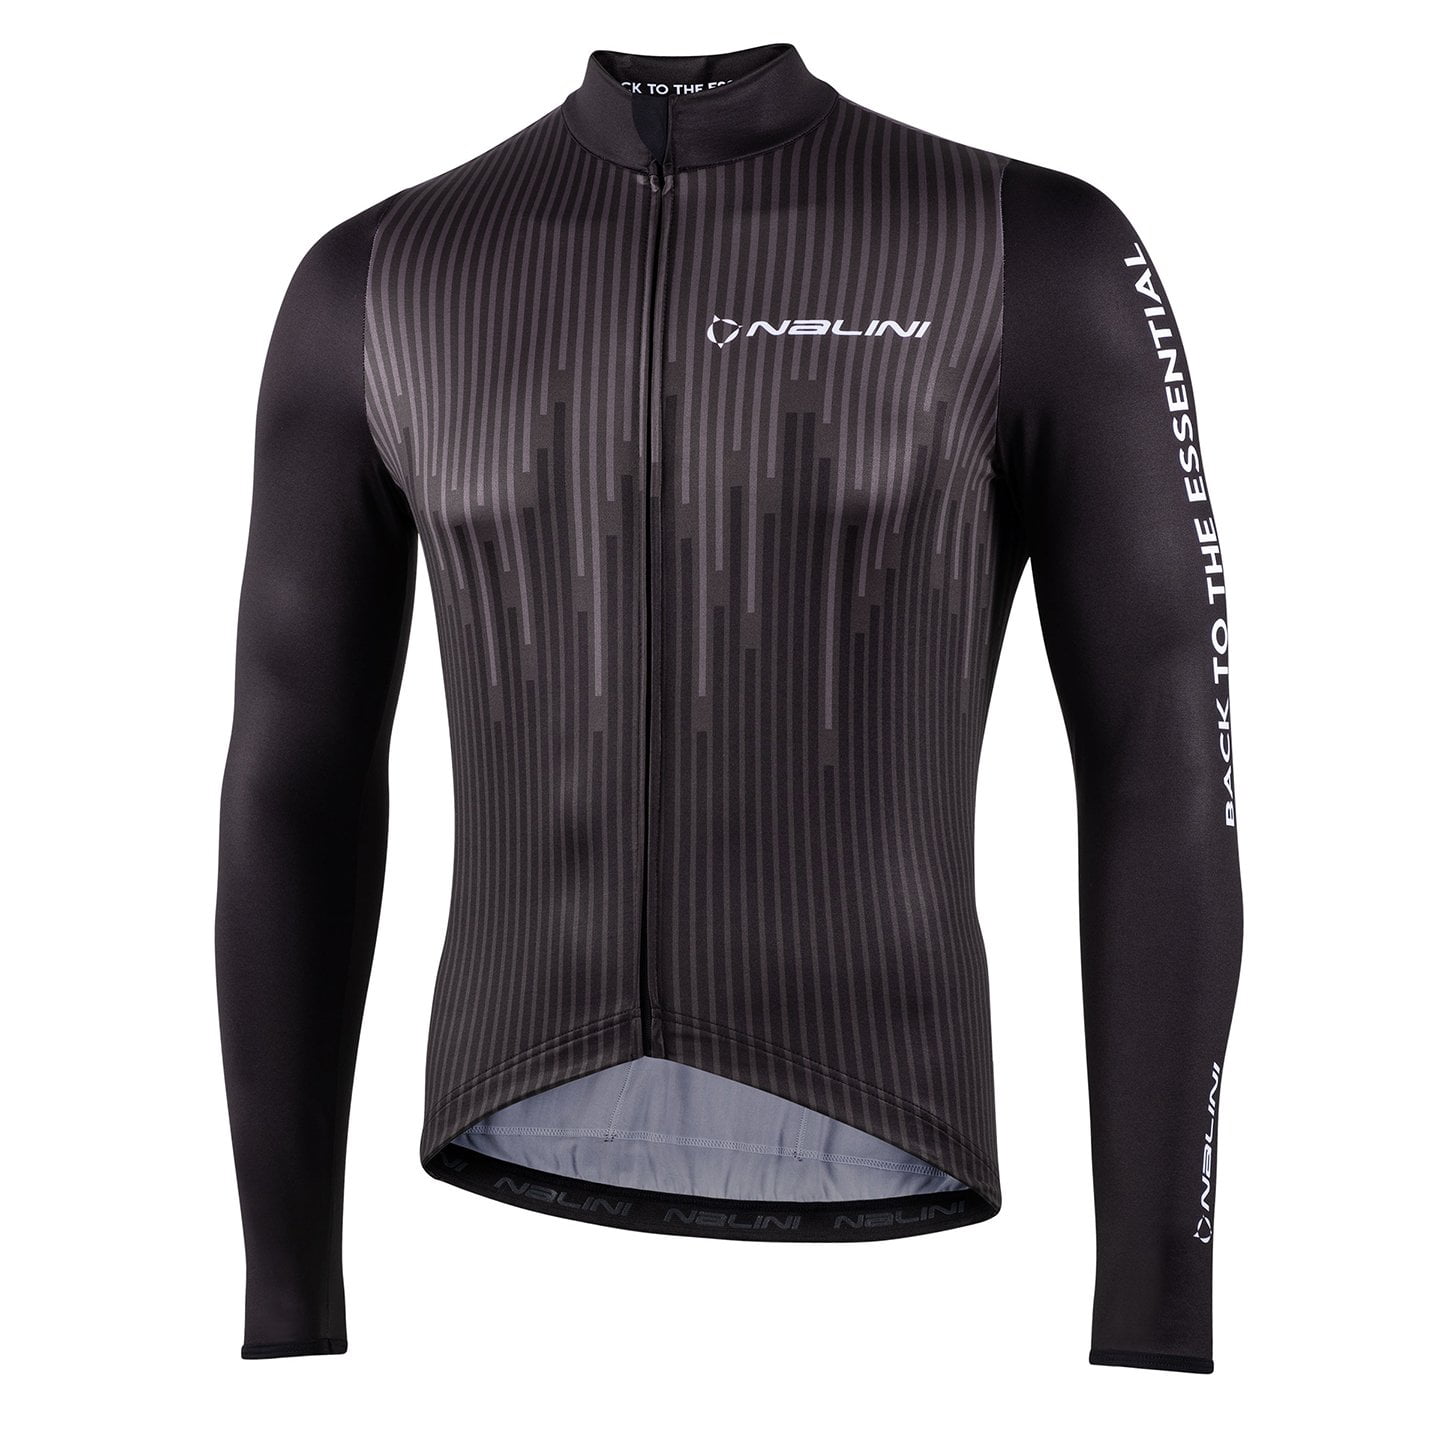 NALINI Fit Long Sleeve Jersey Long Sleeve Jersey, for men, size S, Cycling jersey, Cycling clothing